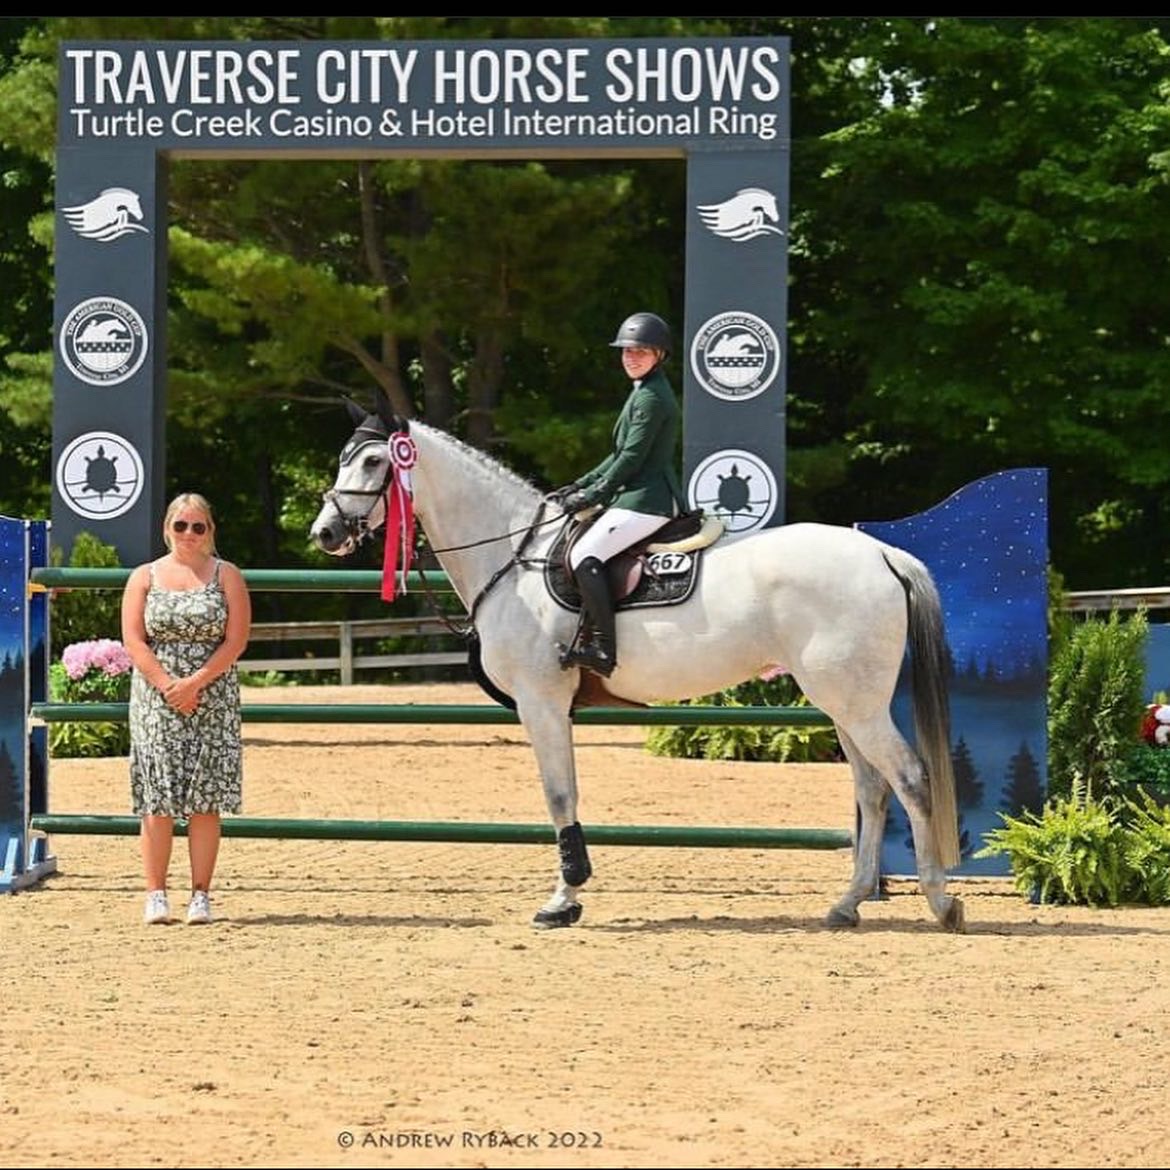 Wow! Congratulations to Taylor Madden and Fata Morgana taking come the 2nd place in the $30,000 National GP at Traverse City!